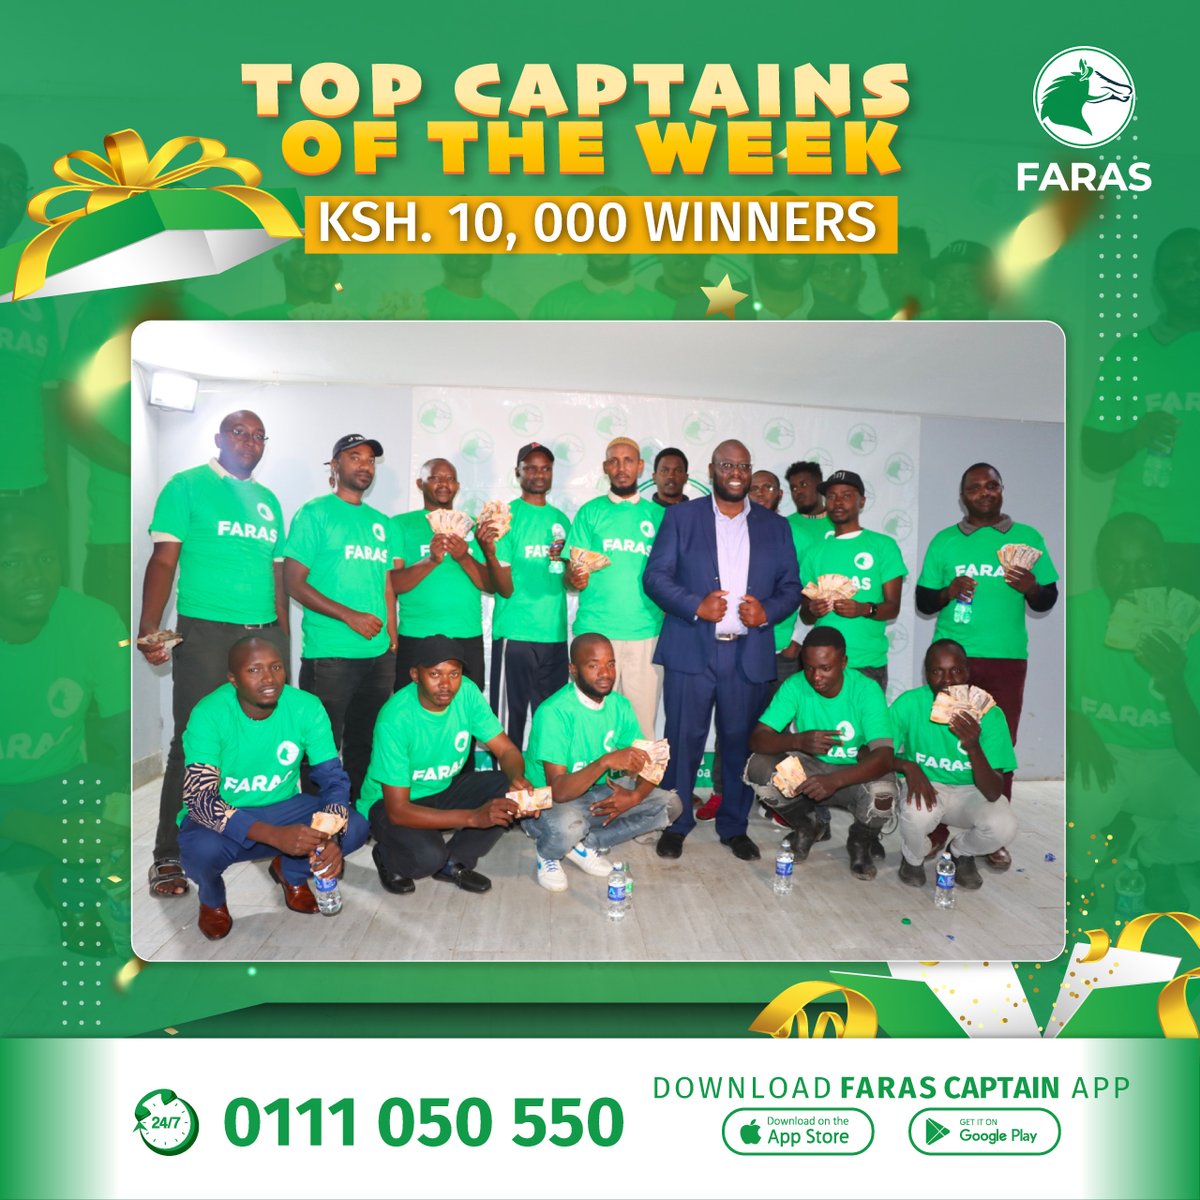 𝐁𝐨𝐨𝐬𝐭 Y𝐨𝐮𝐫 𝐄𝐚𝐫𝐧!
 
Join the league of elite Captains and experience the ride of success with exclusive Faras Weekly rewards.

Join us in applauding the champions of the road.

Download Faras App faras.link/FarasCaptains. 

#FarasRewards #DrivingExcellence'